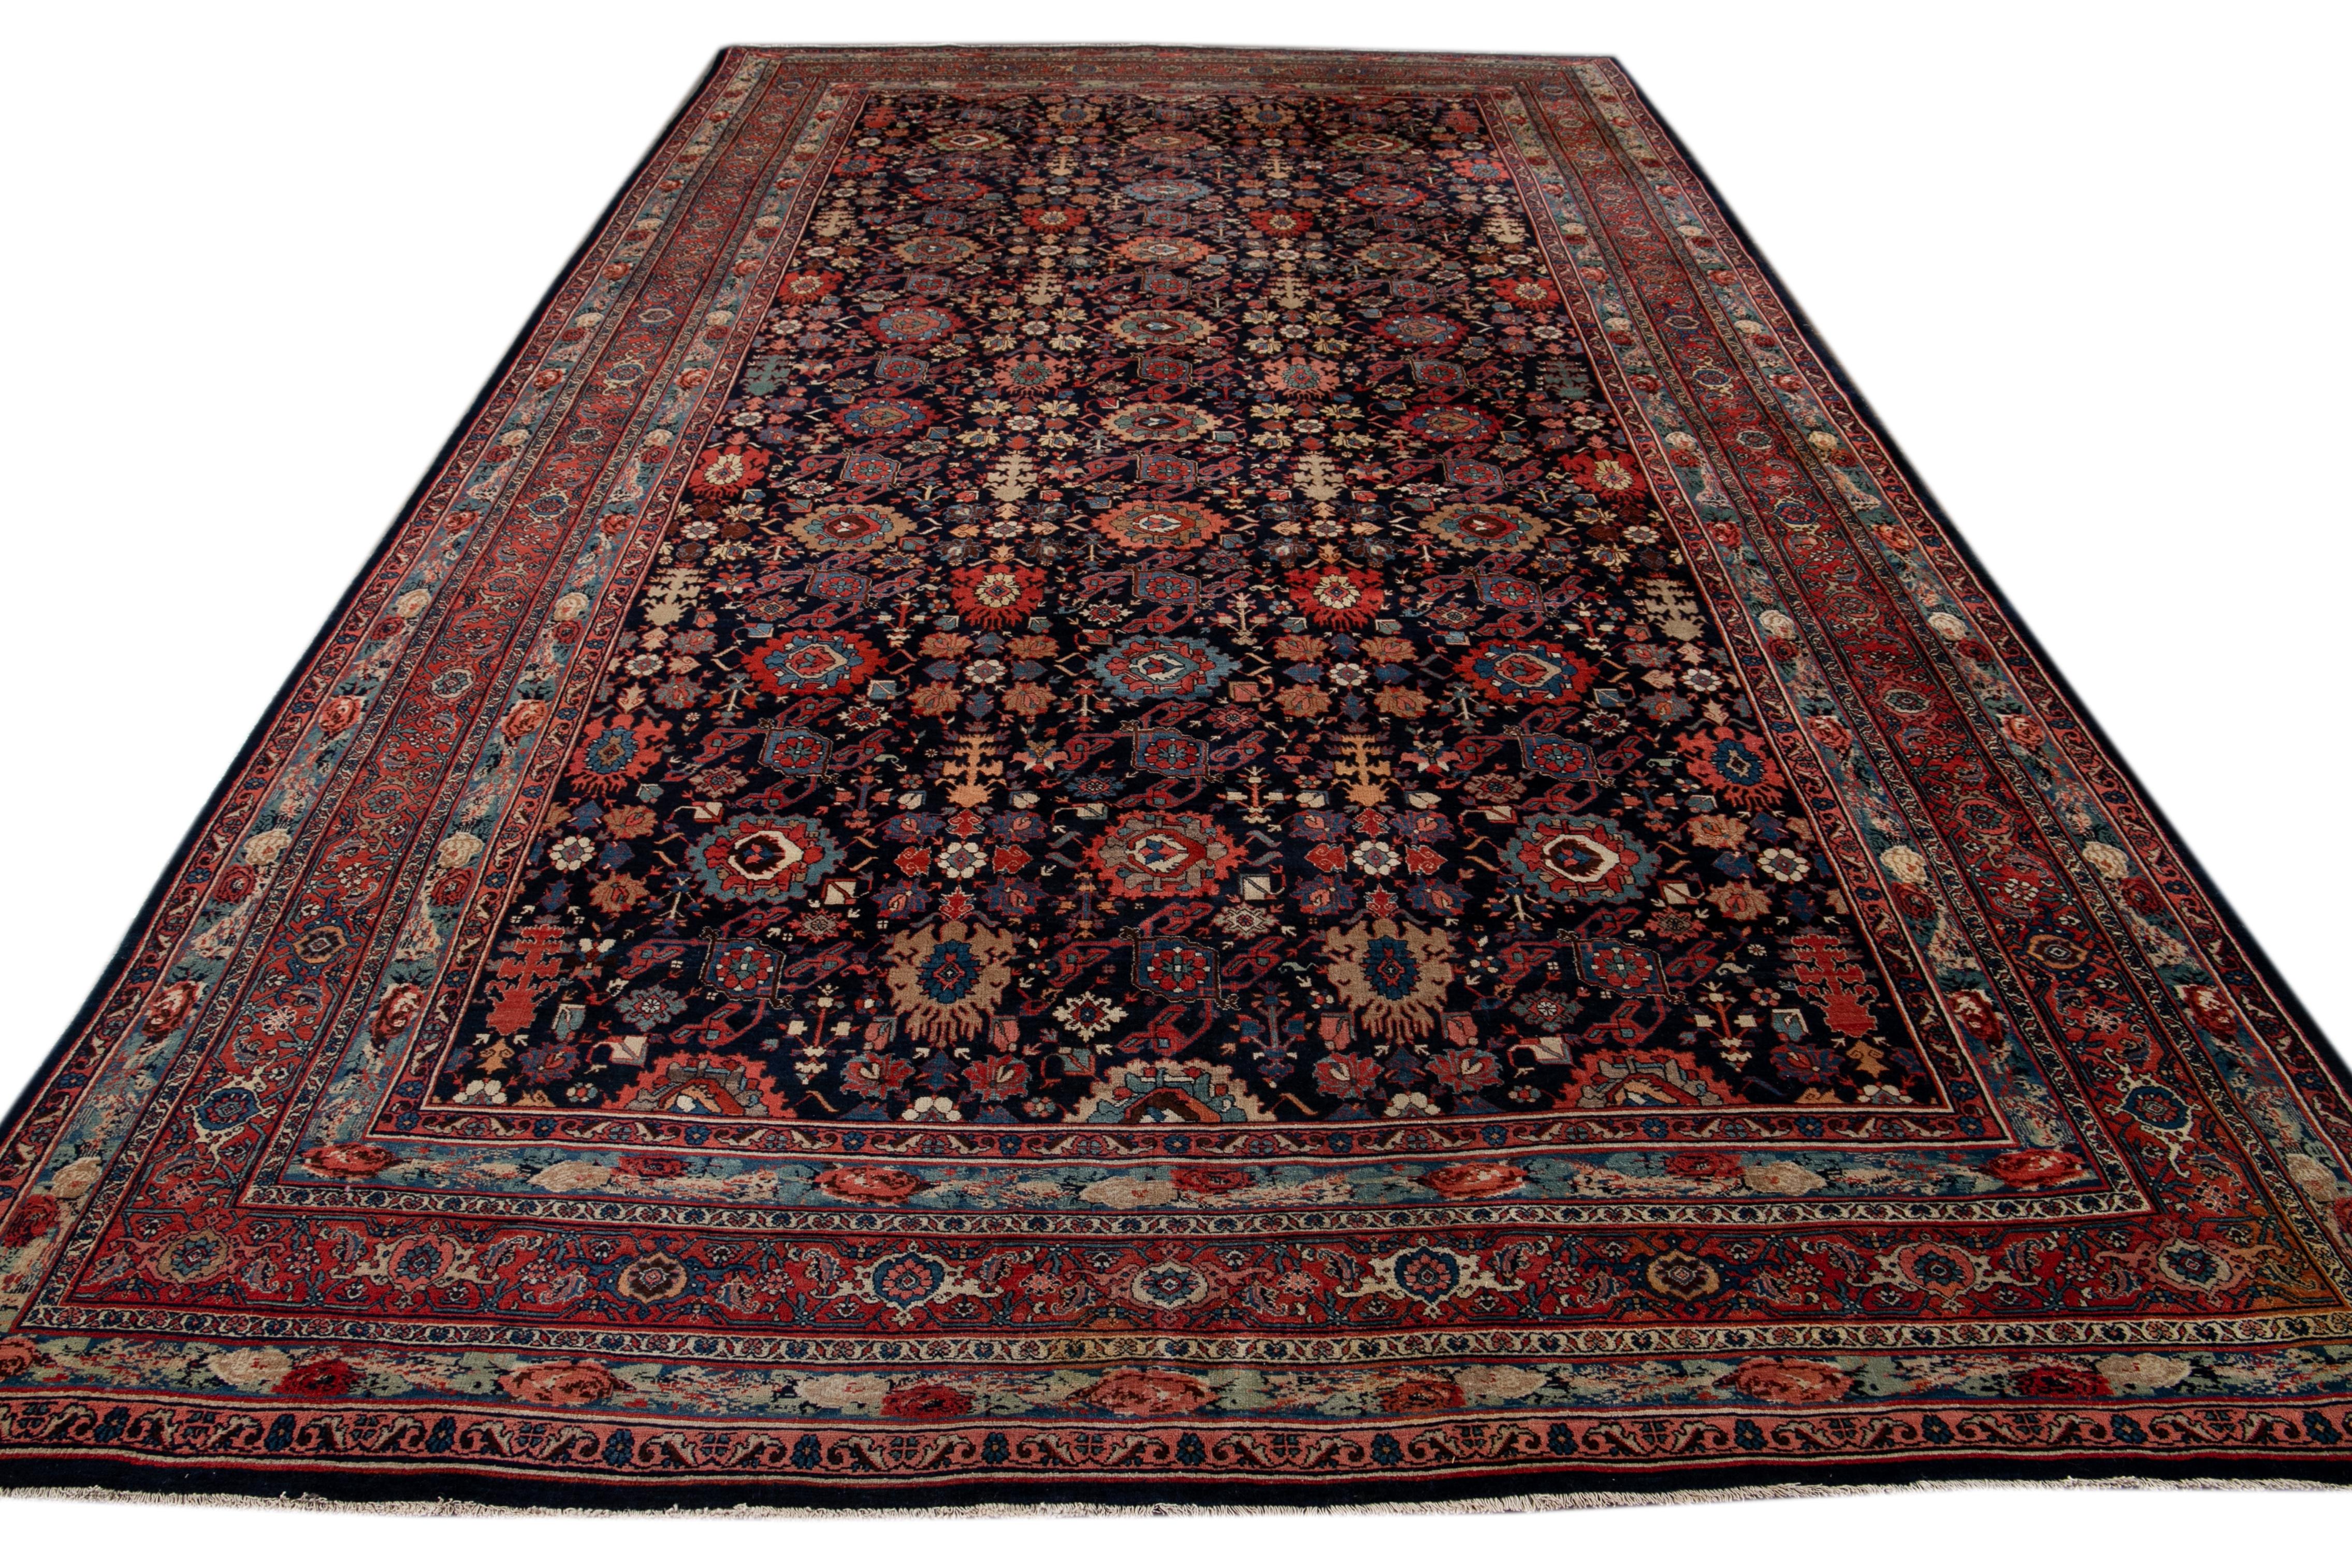 Beautiful antique Oversize Bidjar hand knotted wool rug. This rug has a navy-blue field with a traditional multicolored medallion design. This rug also features a multicolored red border,

This rug measures 10' 3